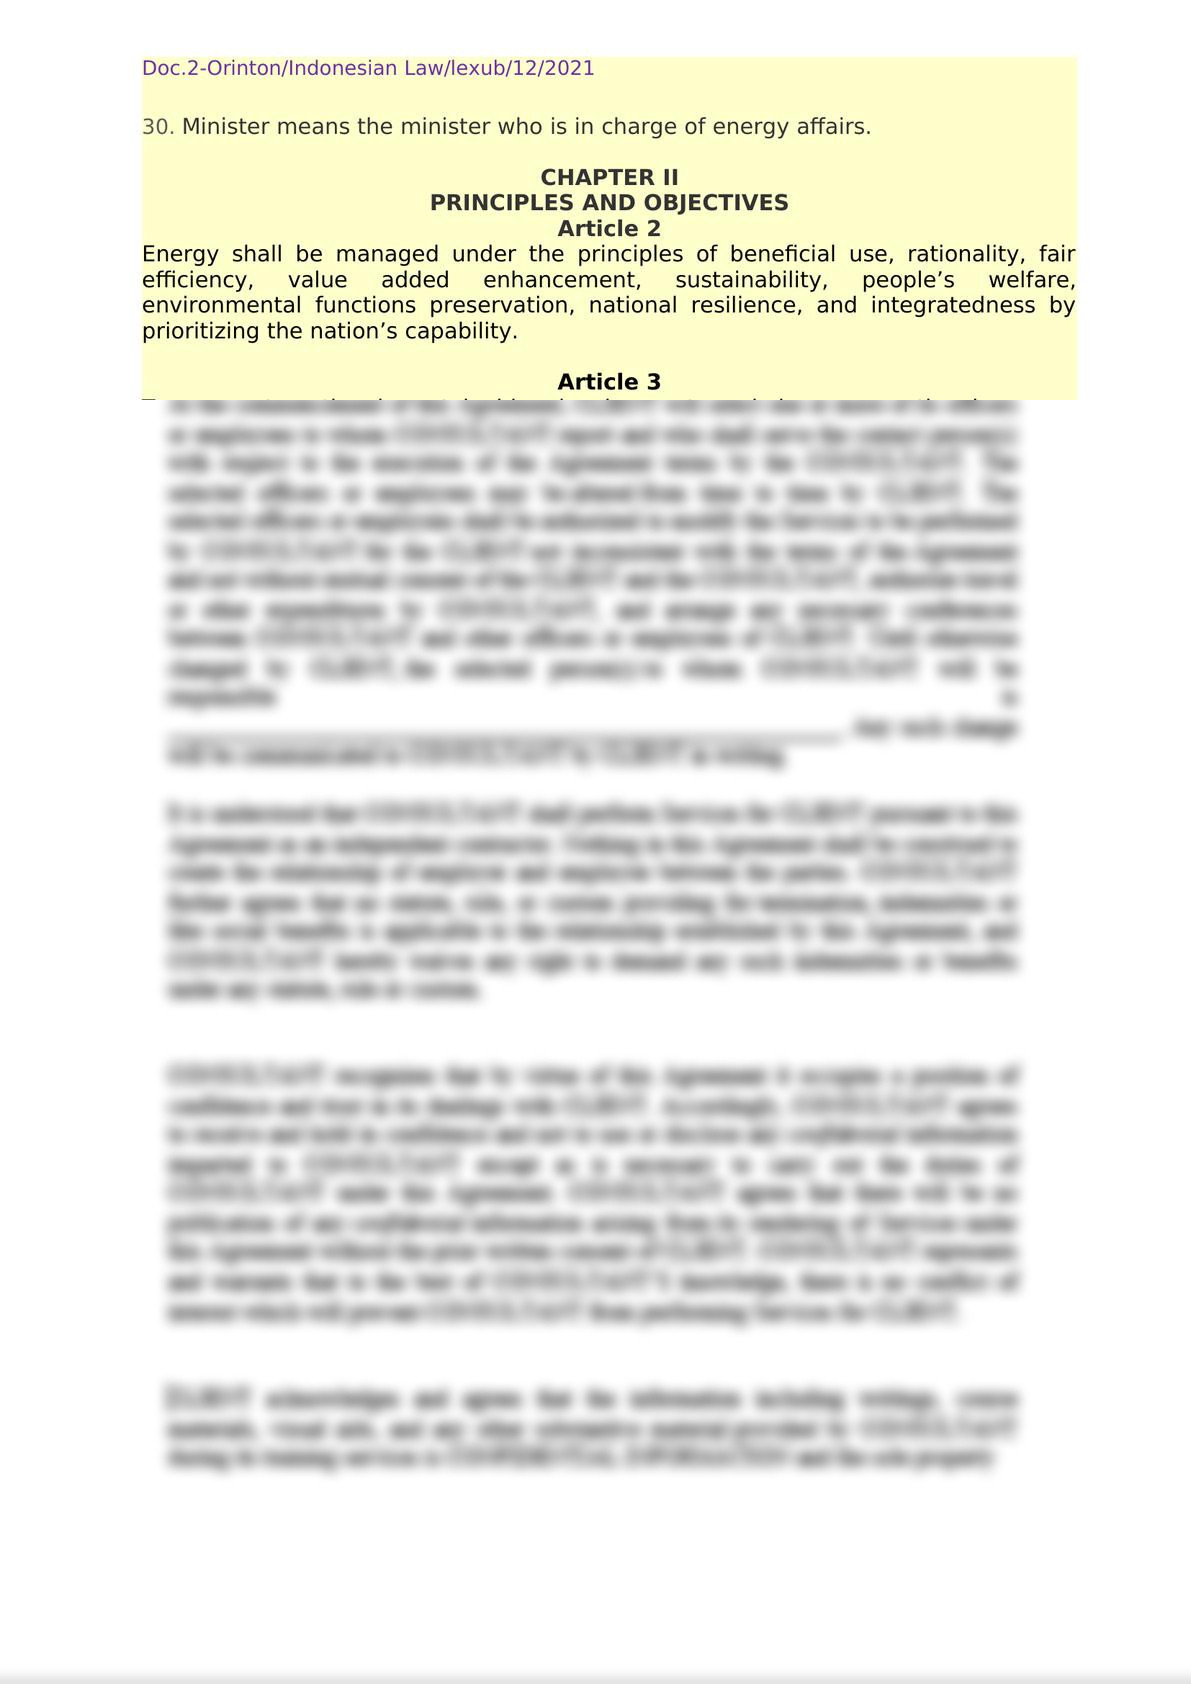 The Law of Republic of Indonesia Number 30 of 2007 concerning Energy-2